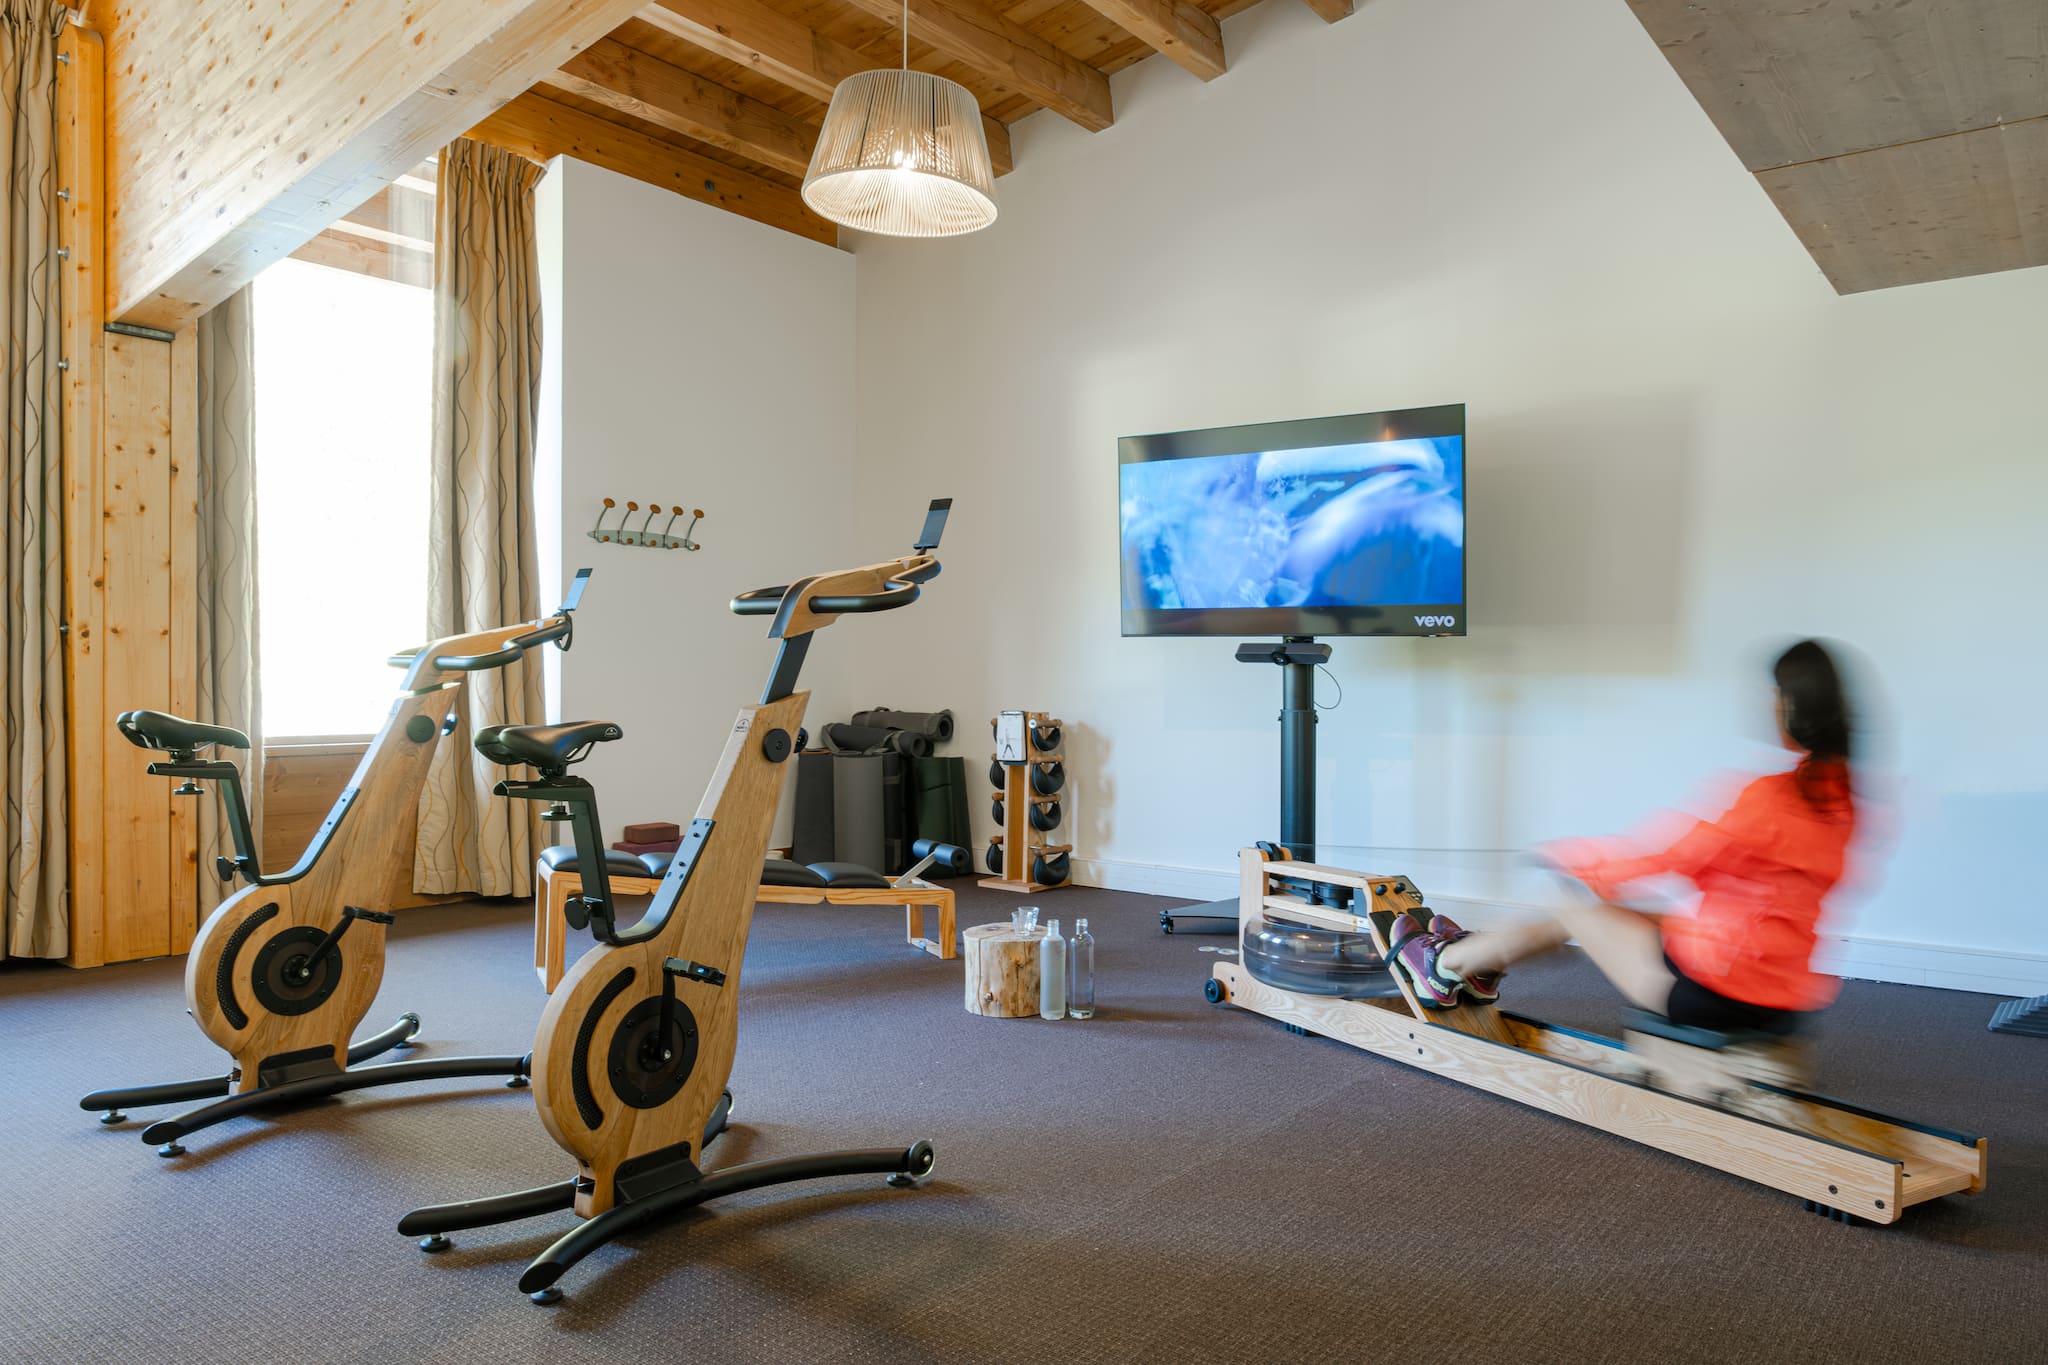 Room with modern sports equipment